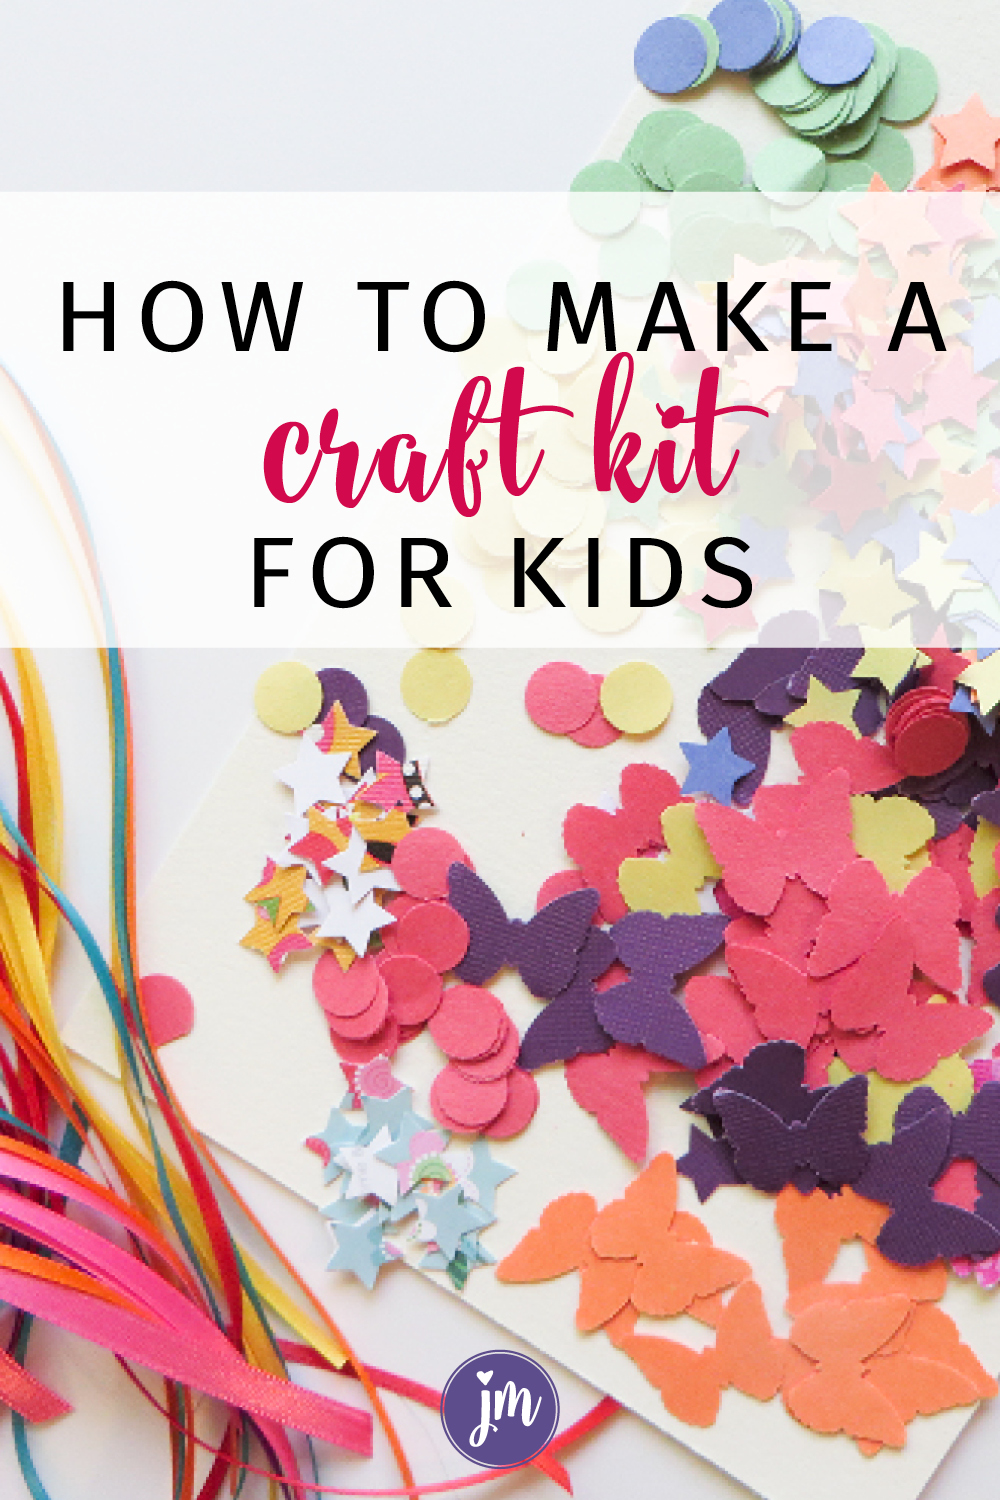 How to Make a Craft Kit (for kids)